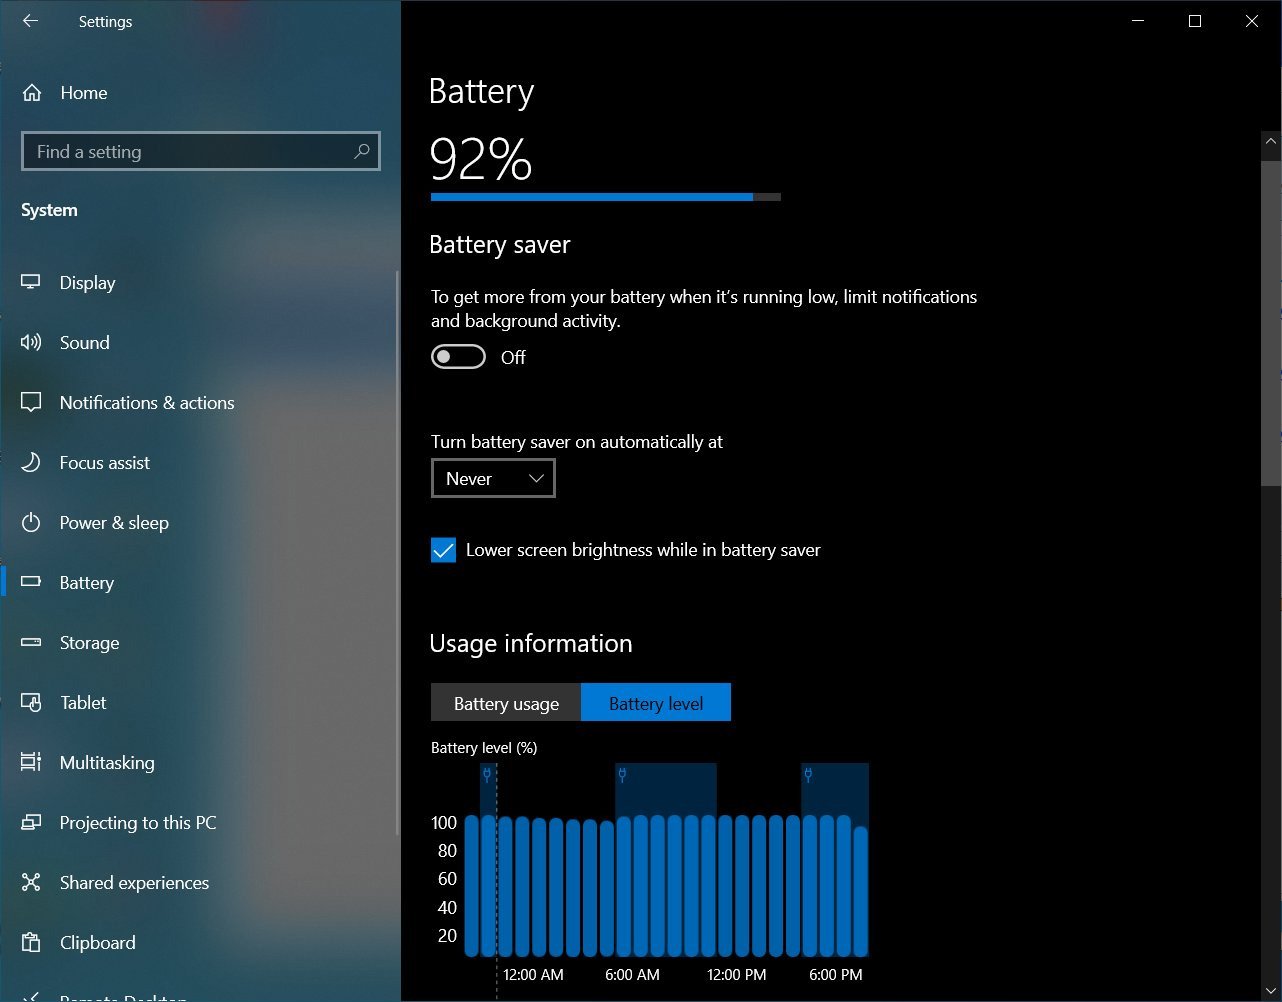 New battery level and usage graphs